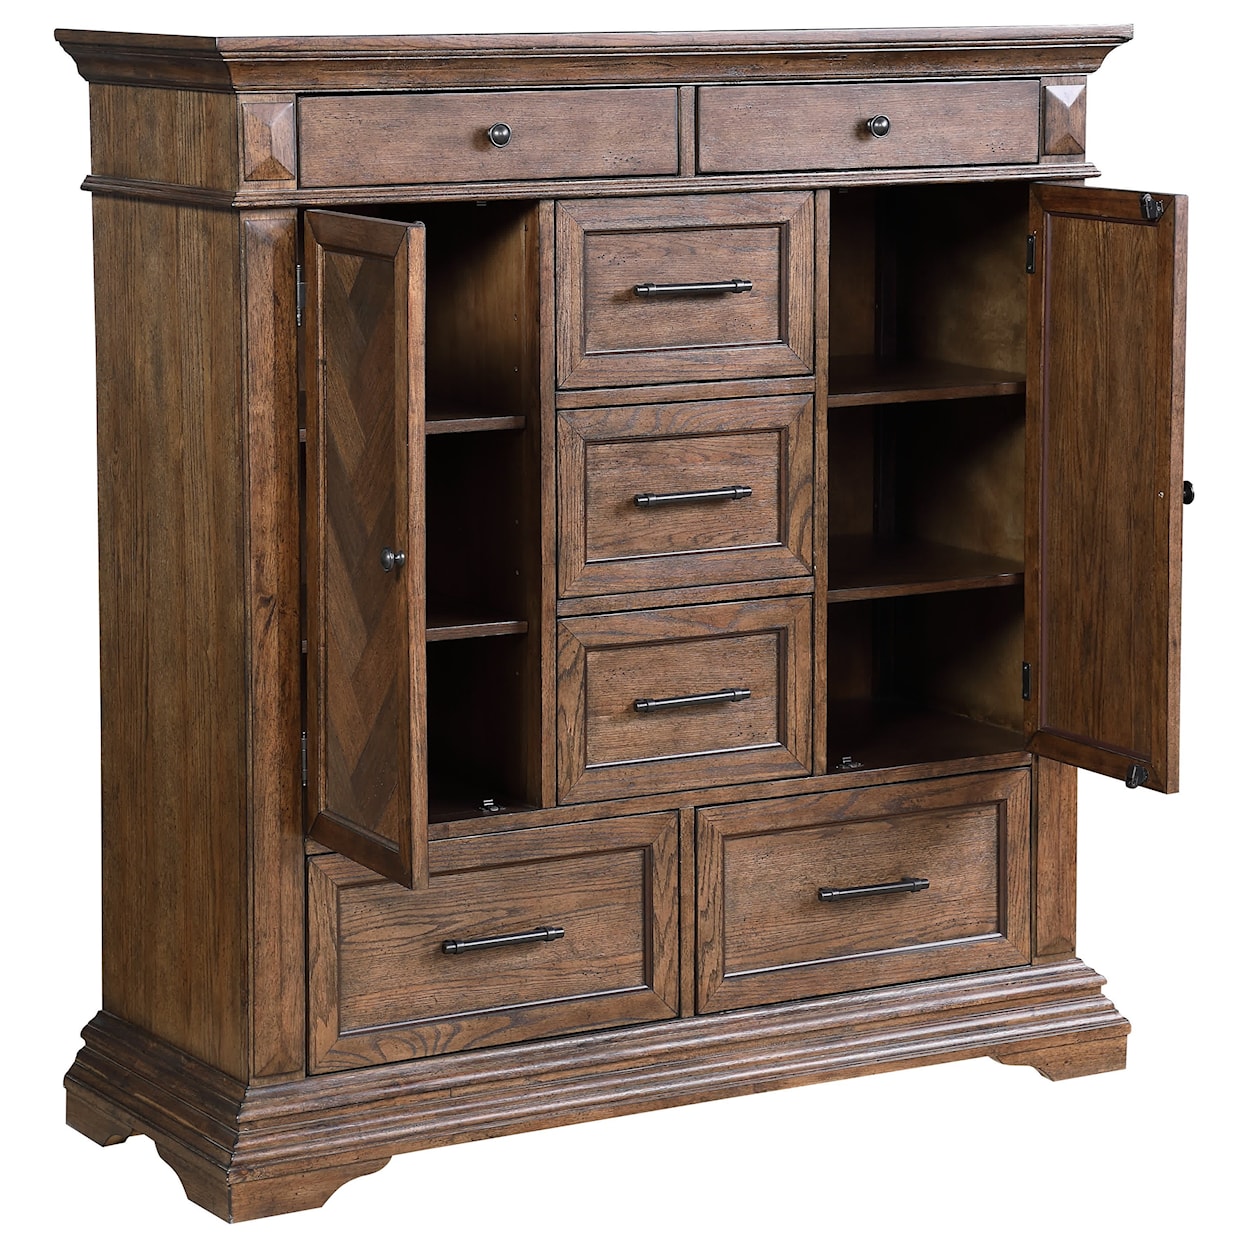 New Classic Furniture Mar Vista Chest with Doors